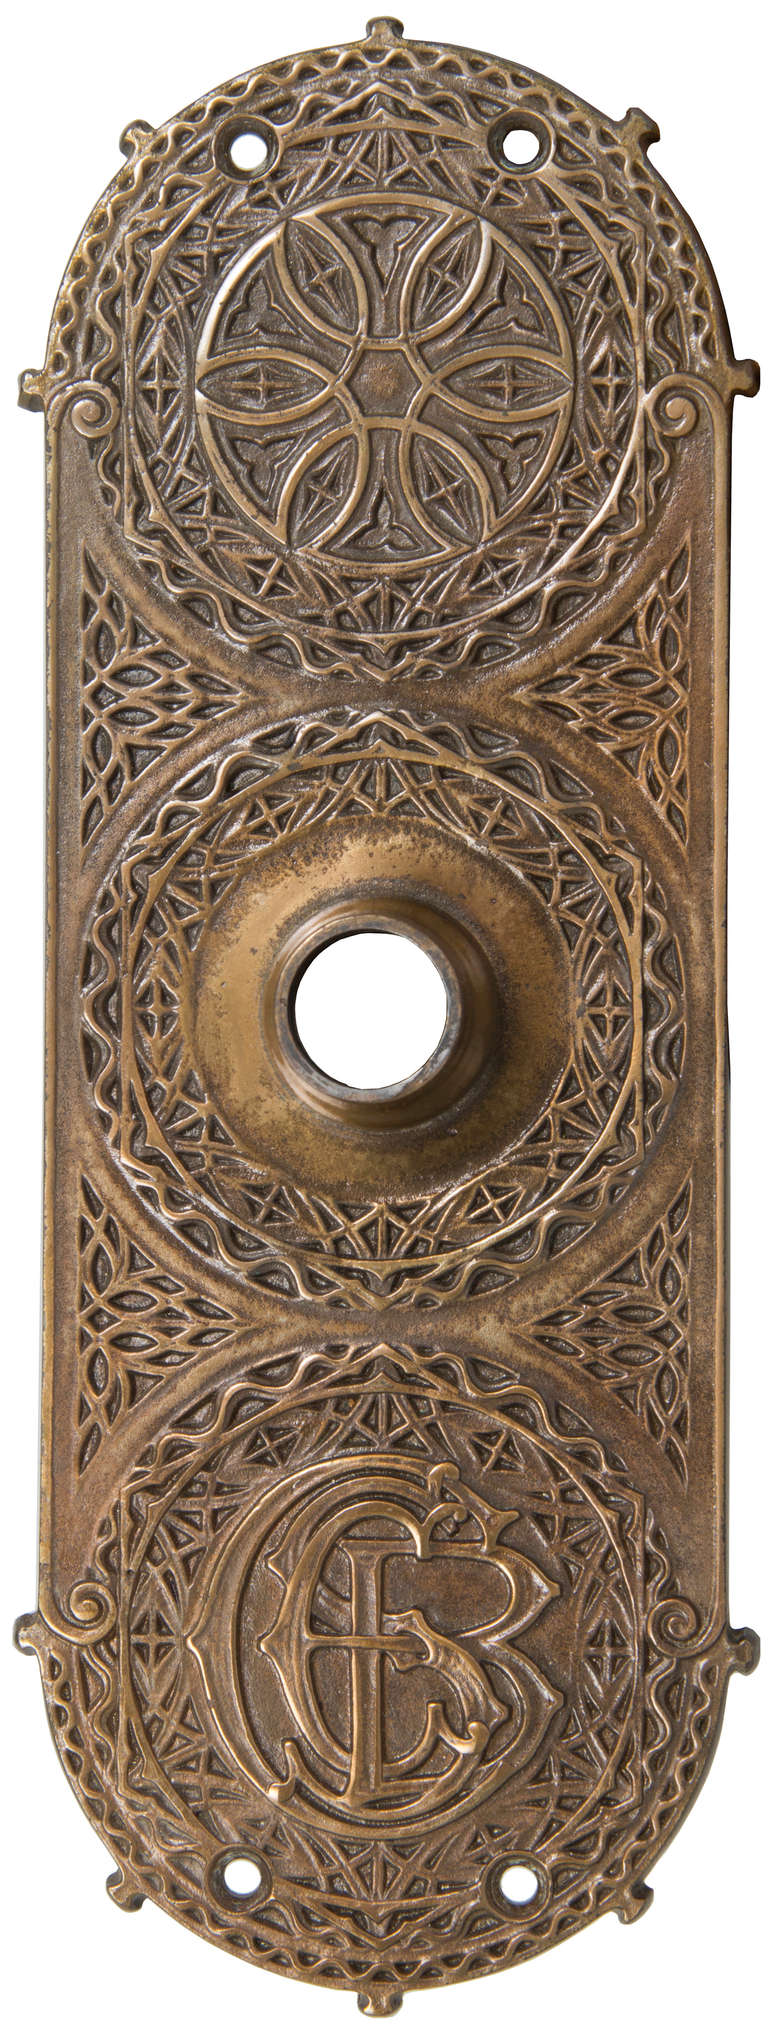 This is an example of the Chicago Stock Exchange Building interior doorknob and faceplate set, with the initials 